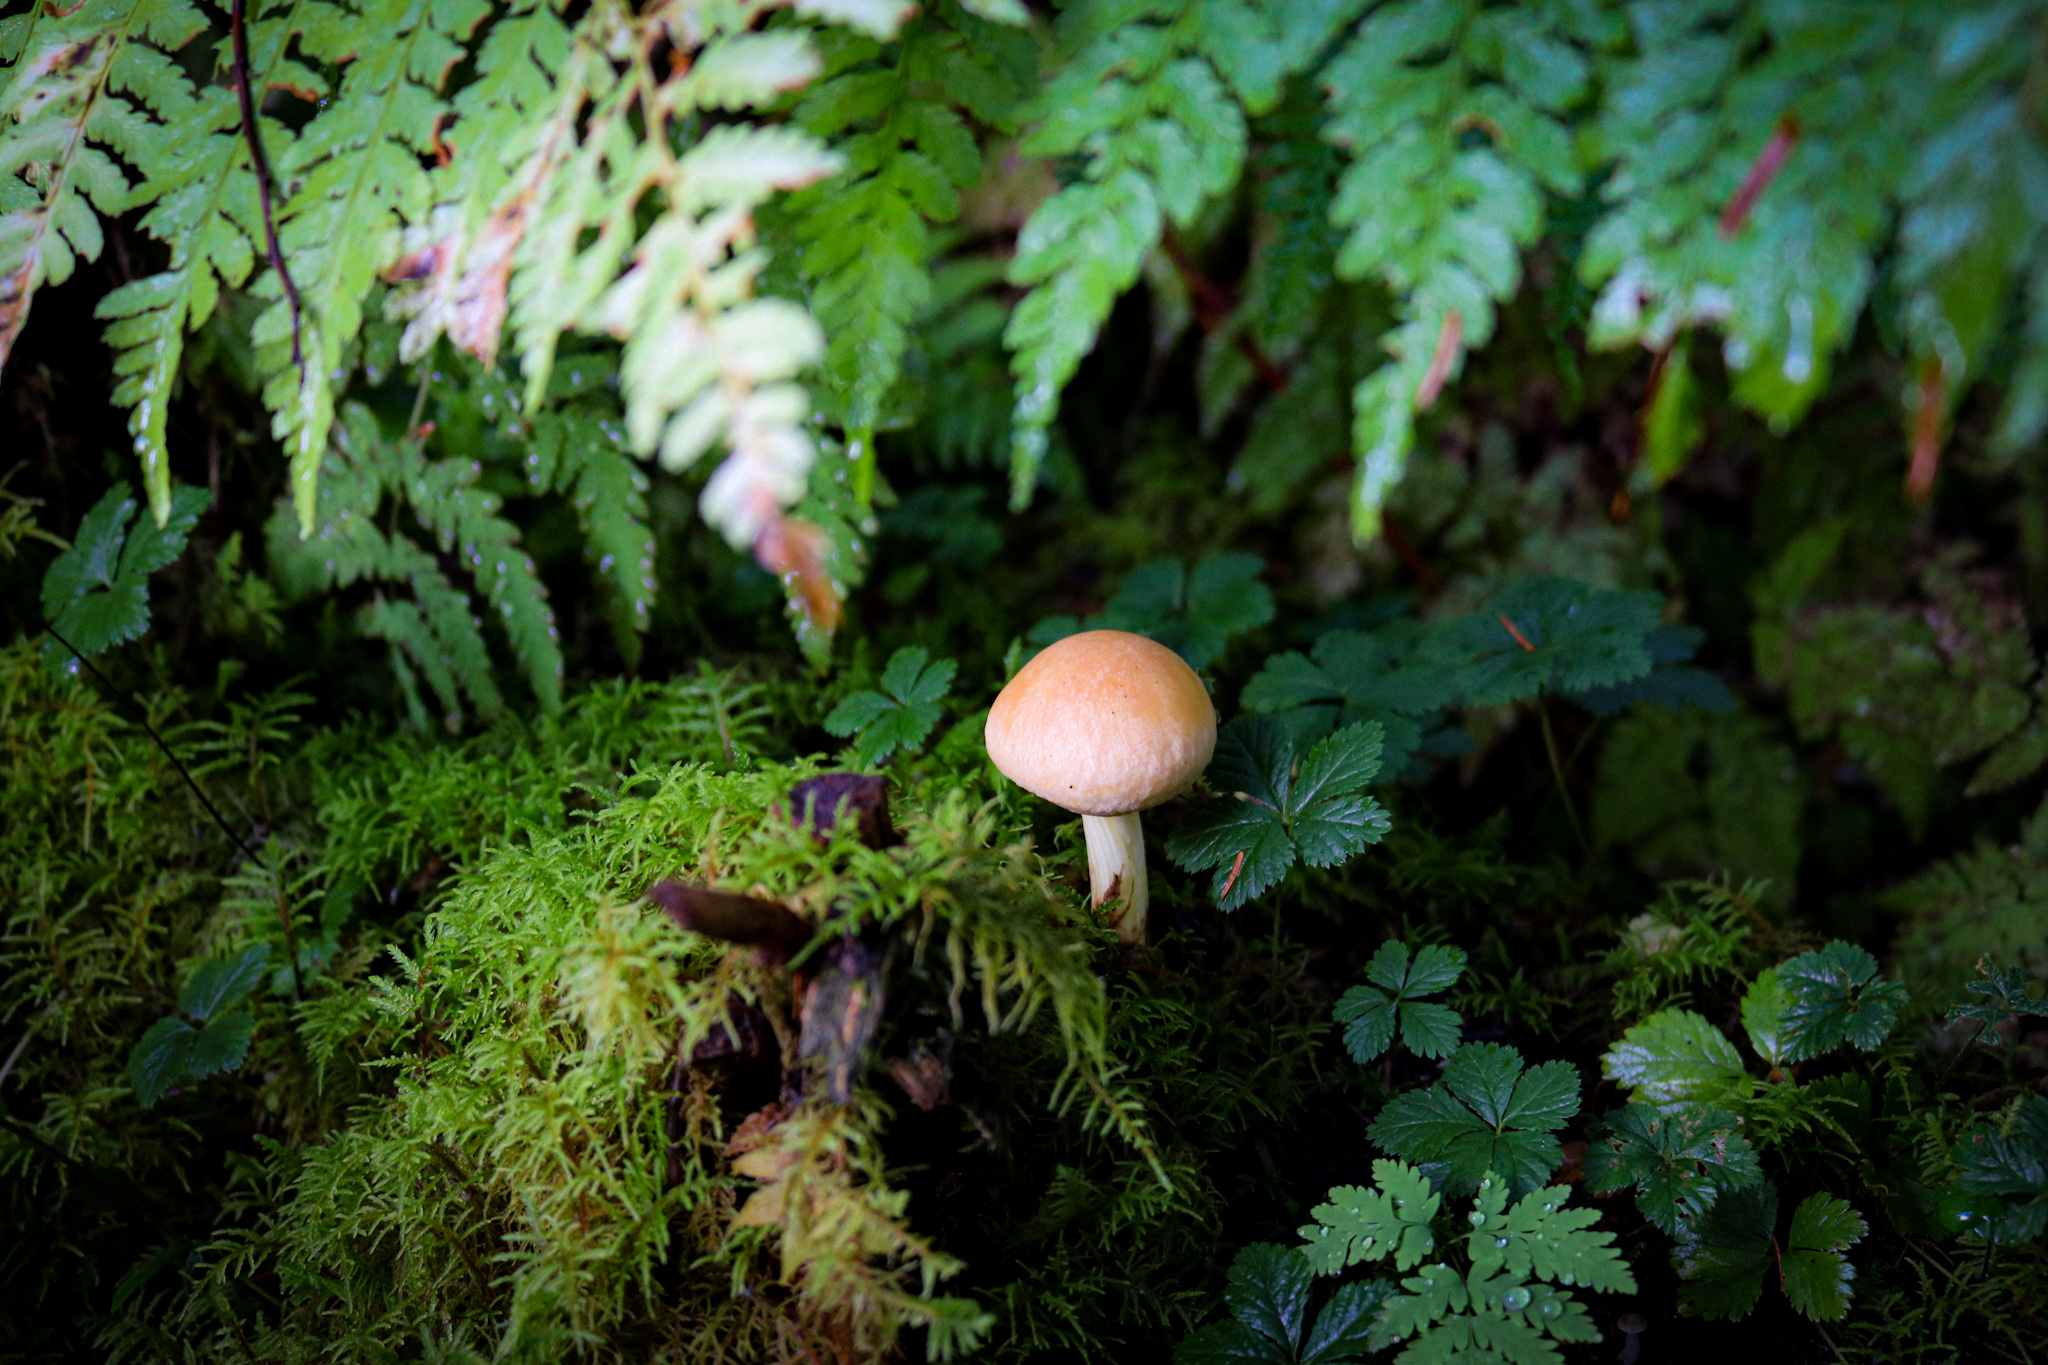 little brown mushroom with a white stalk growing underneath ferns on a mossy, shrubby patch of greenery